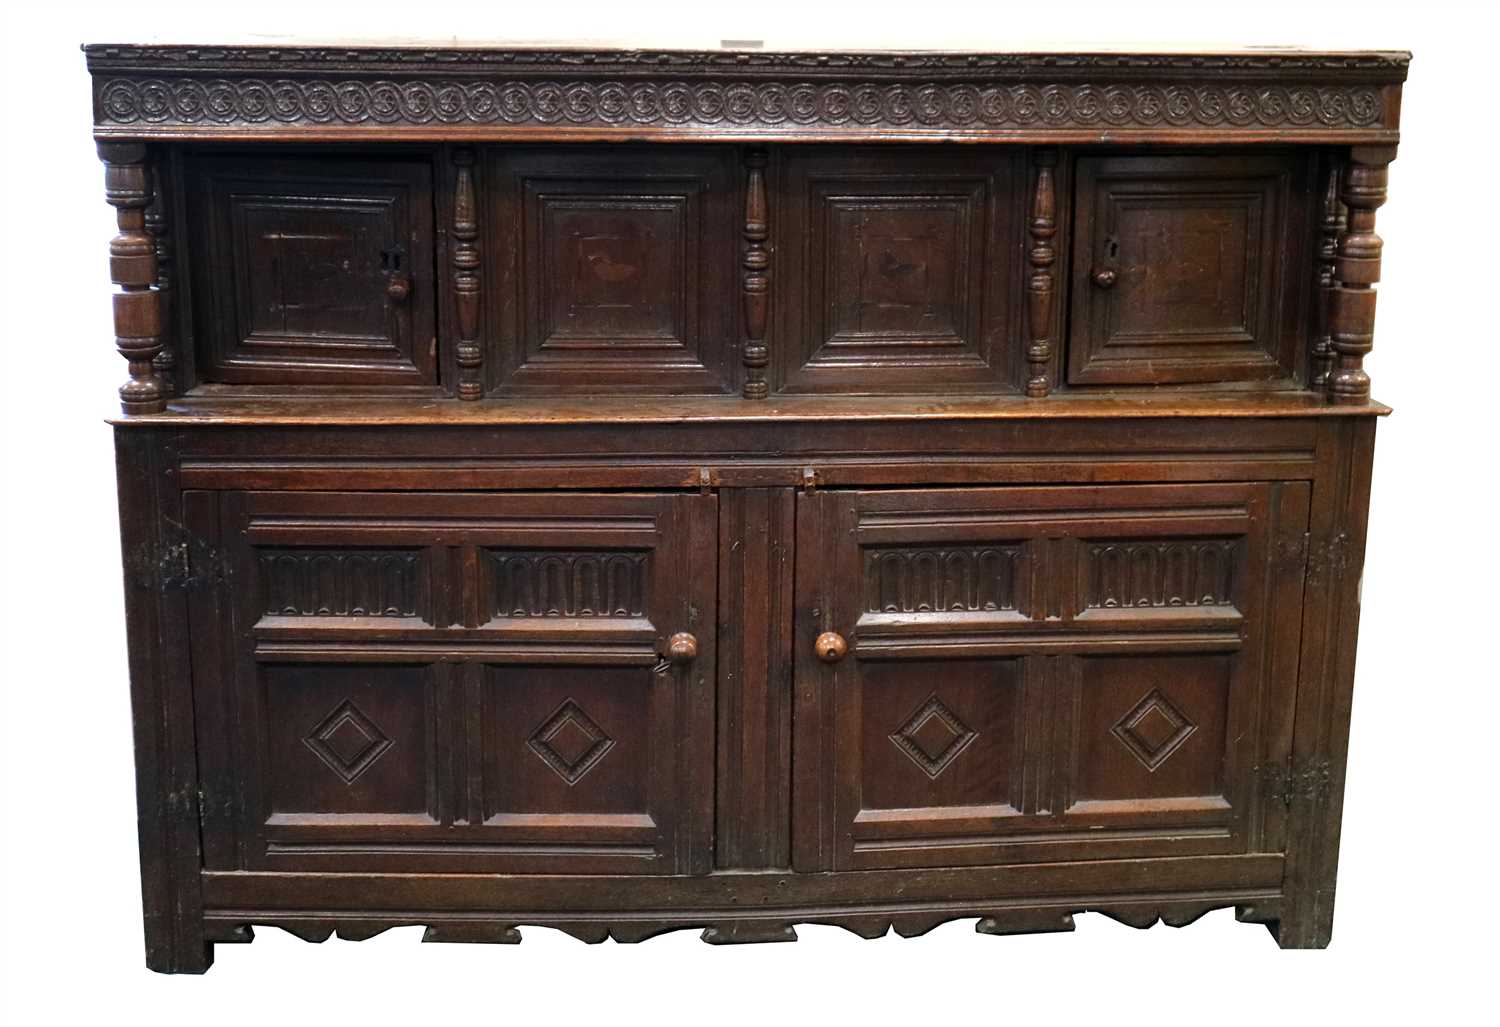 Lot 245 - A large 17th century and later country oak court cupboard